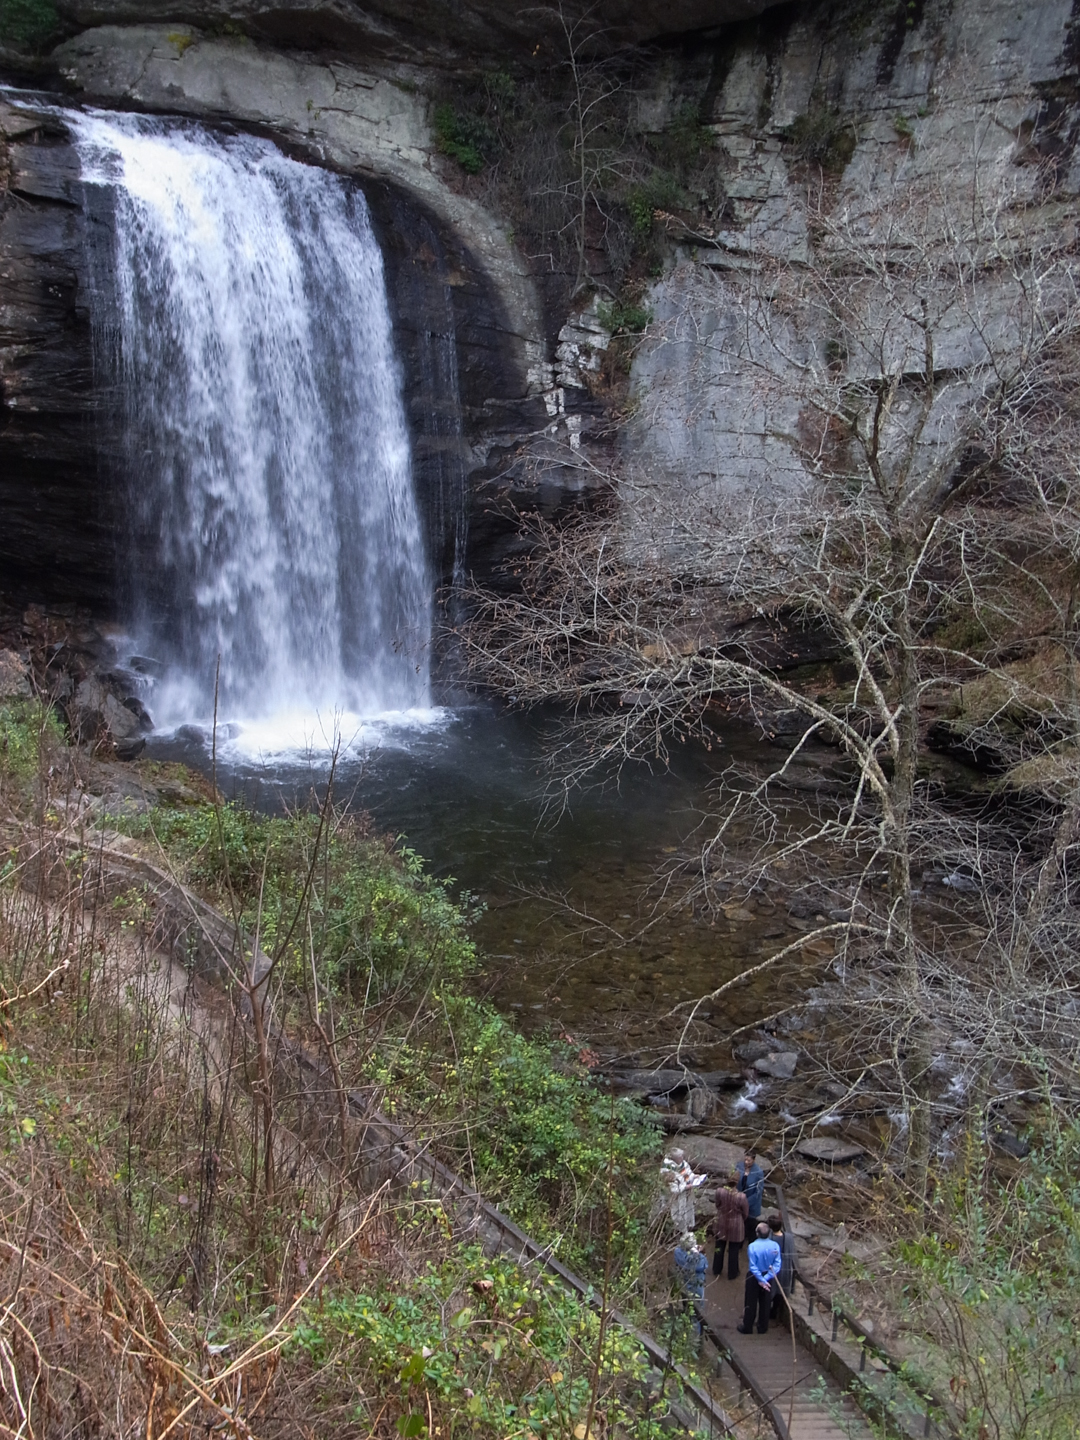 Looking Glass Falls - check out the bottom right, we stumbled across a wedding!